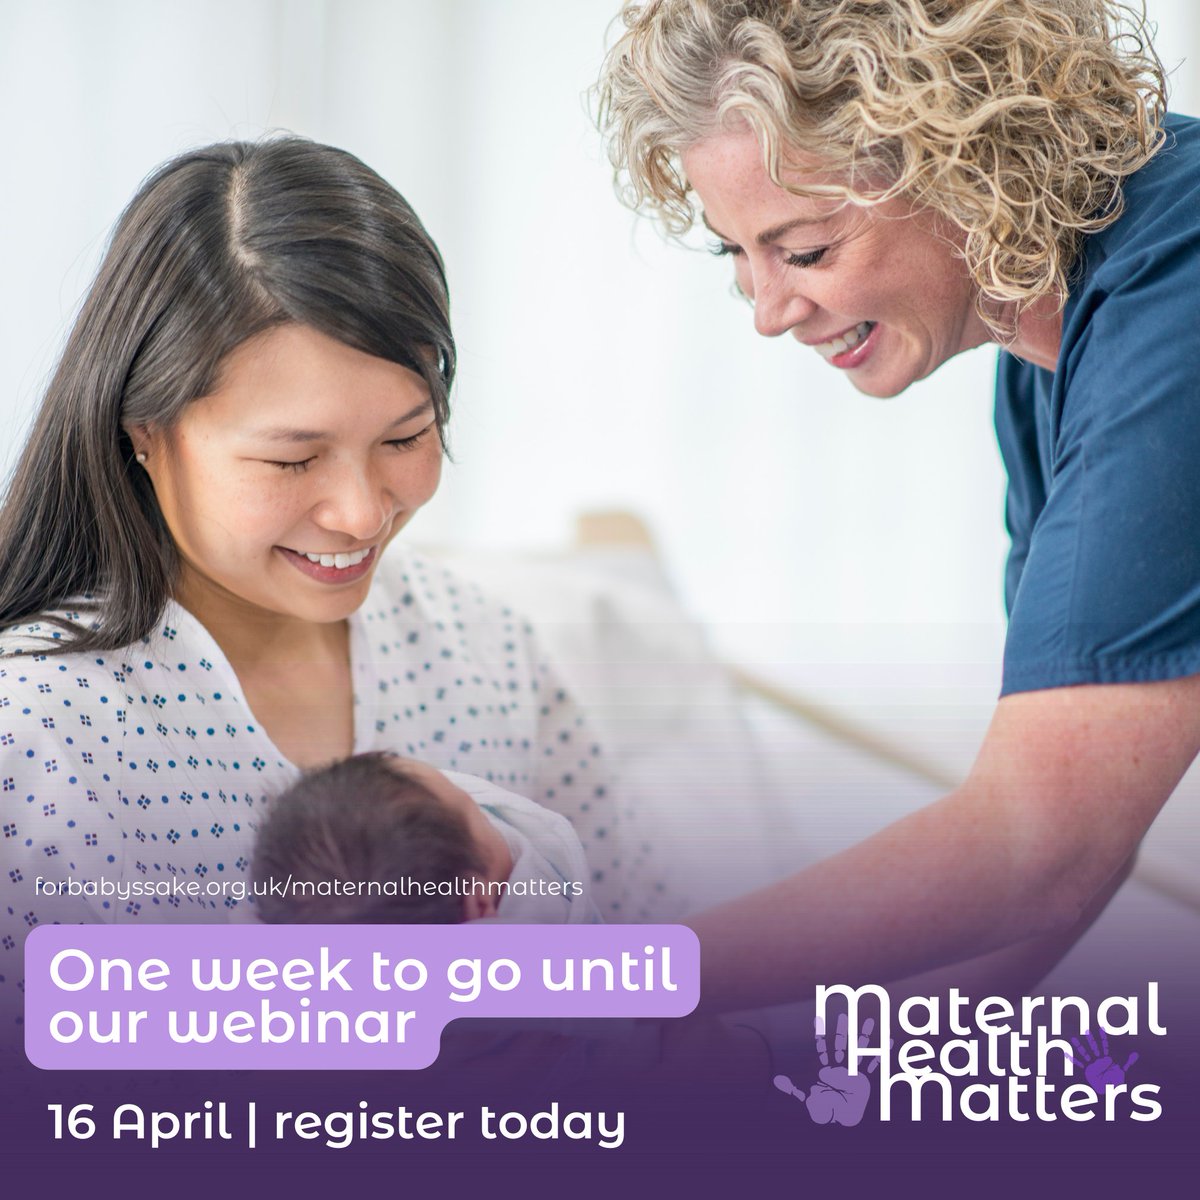 📣 Registrations for the Maternal Health Matters webinar are now open! 🗓️ The FREE webinar will take place at 3PM on 16th April & influential guest speakers will create a safe space to share knowledge around maternal health. 🔗 Find out more & register 👉 events.teams.microsoft.com/event/013ca9b3…